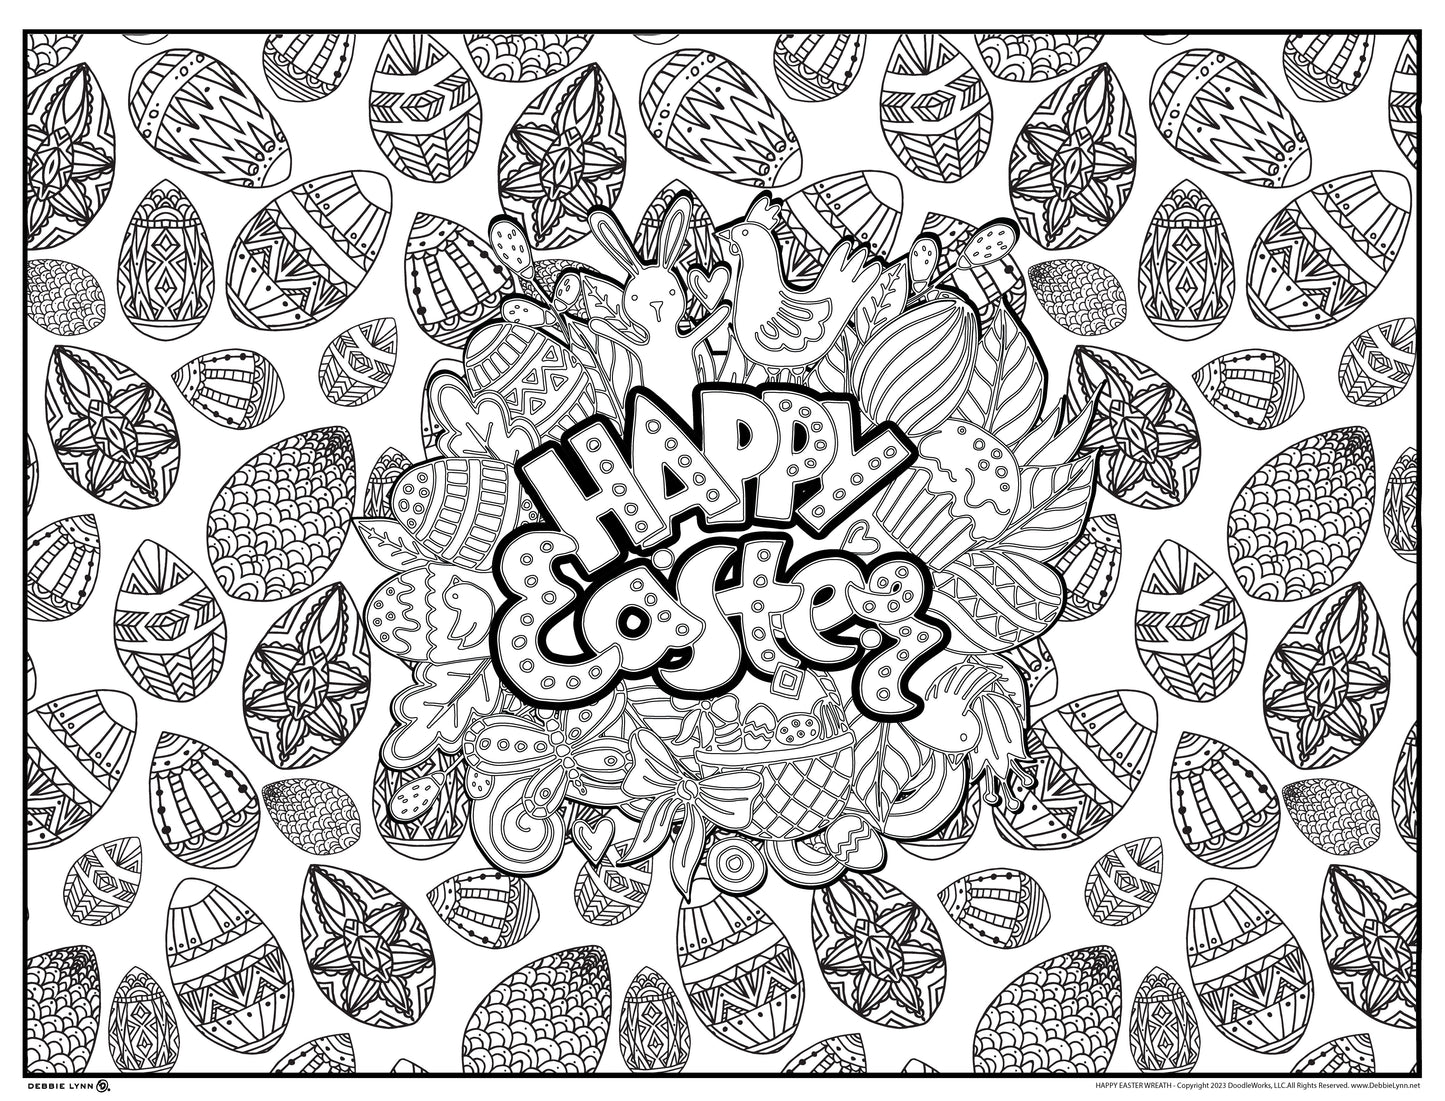 Happy Easter Wreath Personalized Giant Coloring Poster 46"x60"